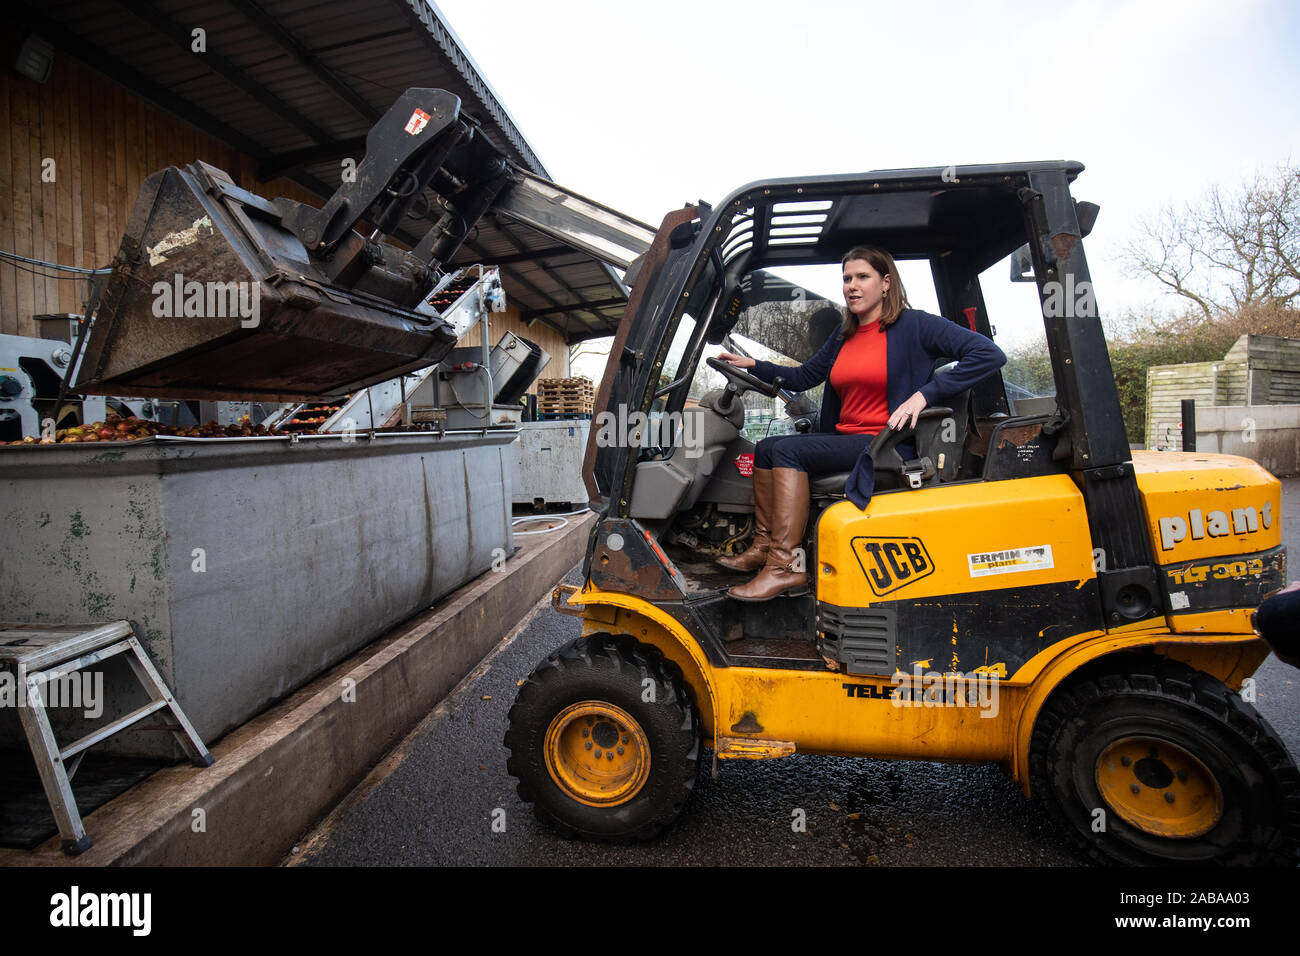 Liberal Democrat leader Jo Swinson drives a JCB during a visit to Dunkertons Cider Company, an organic and plastic free brewery in Cheltenham, Gloucestershire, during campaigning for the General Election. Stock Photo